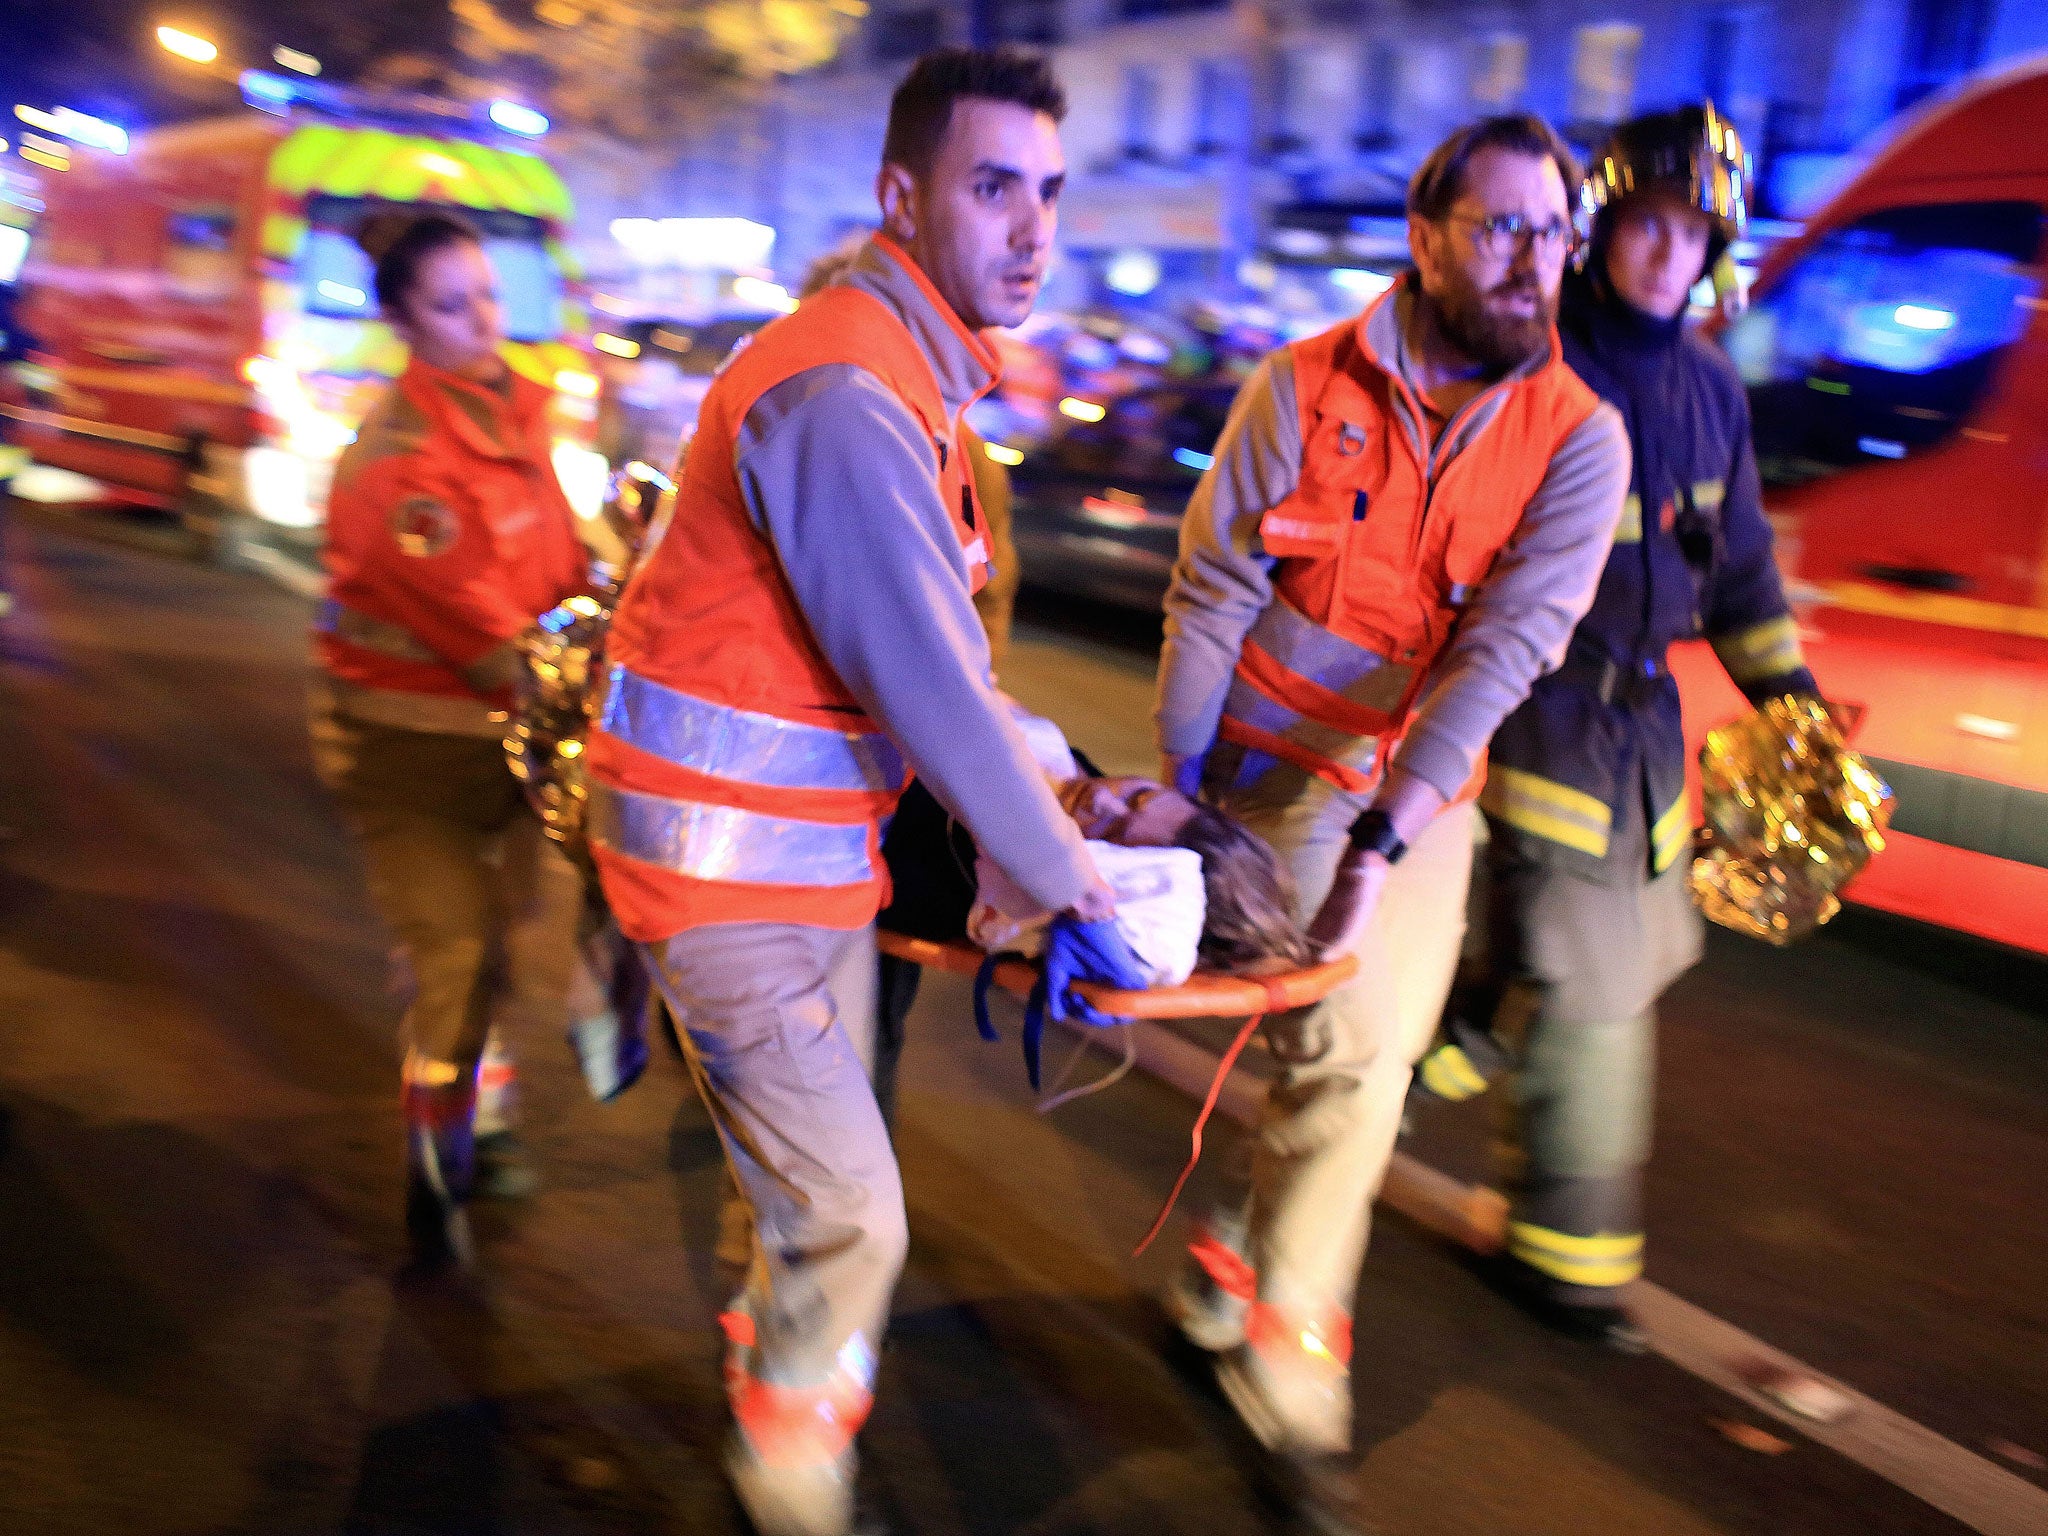 Terror threat: An injured woman is taken from the Bataclan Theatre after the shootings in Paris on 13 November last year